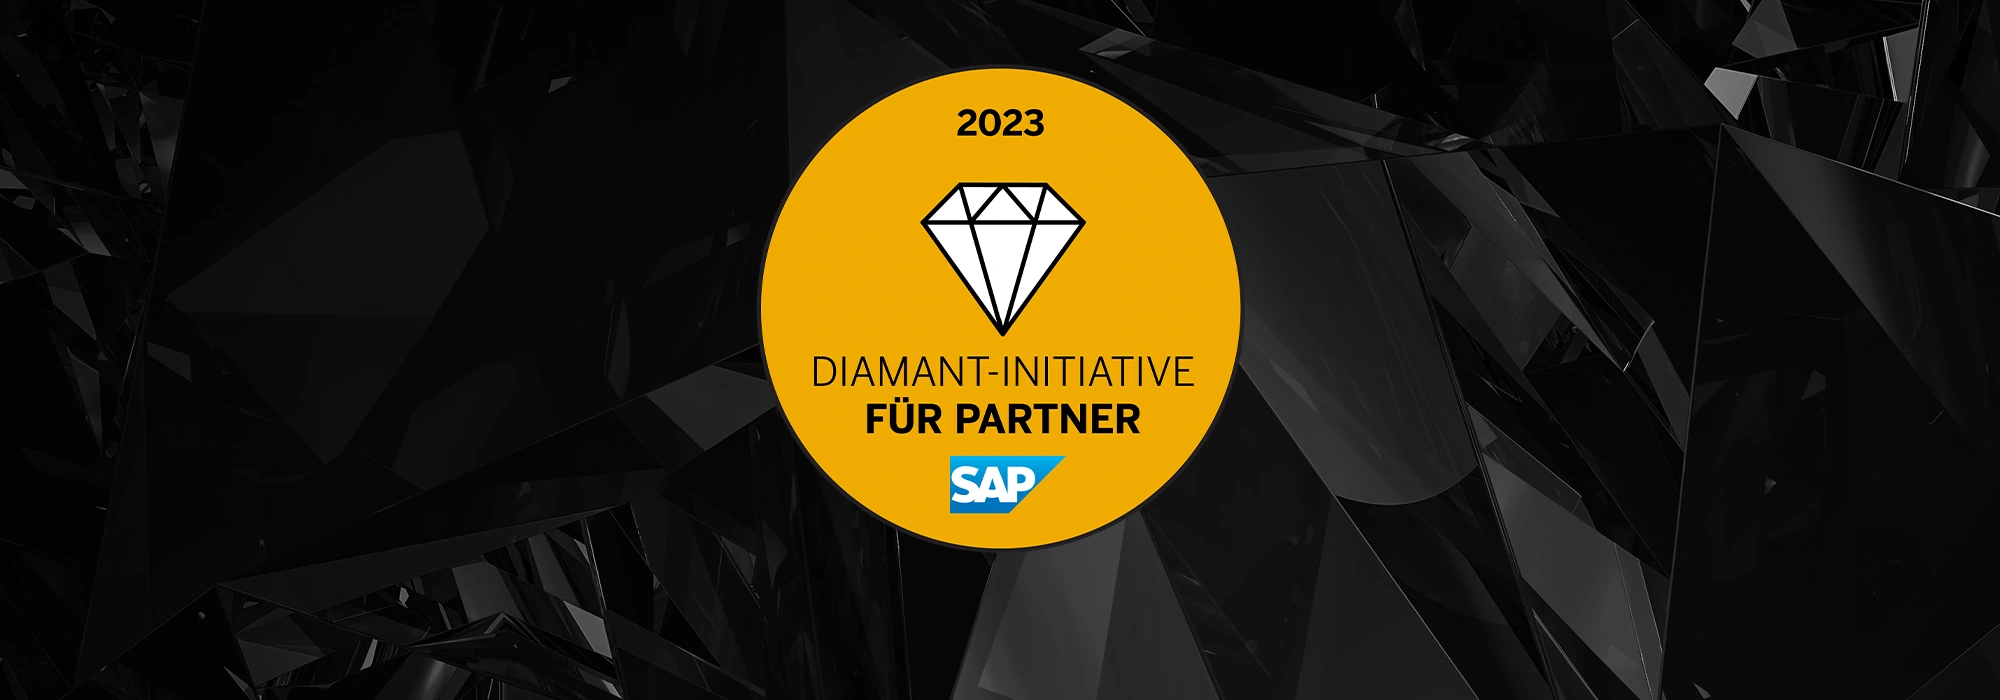 SAP Diamond initiative 2023: Award in the field of “retail & consumer products”